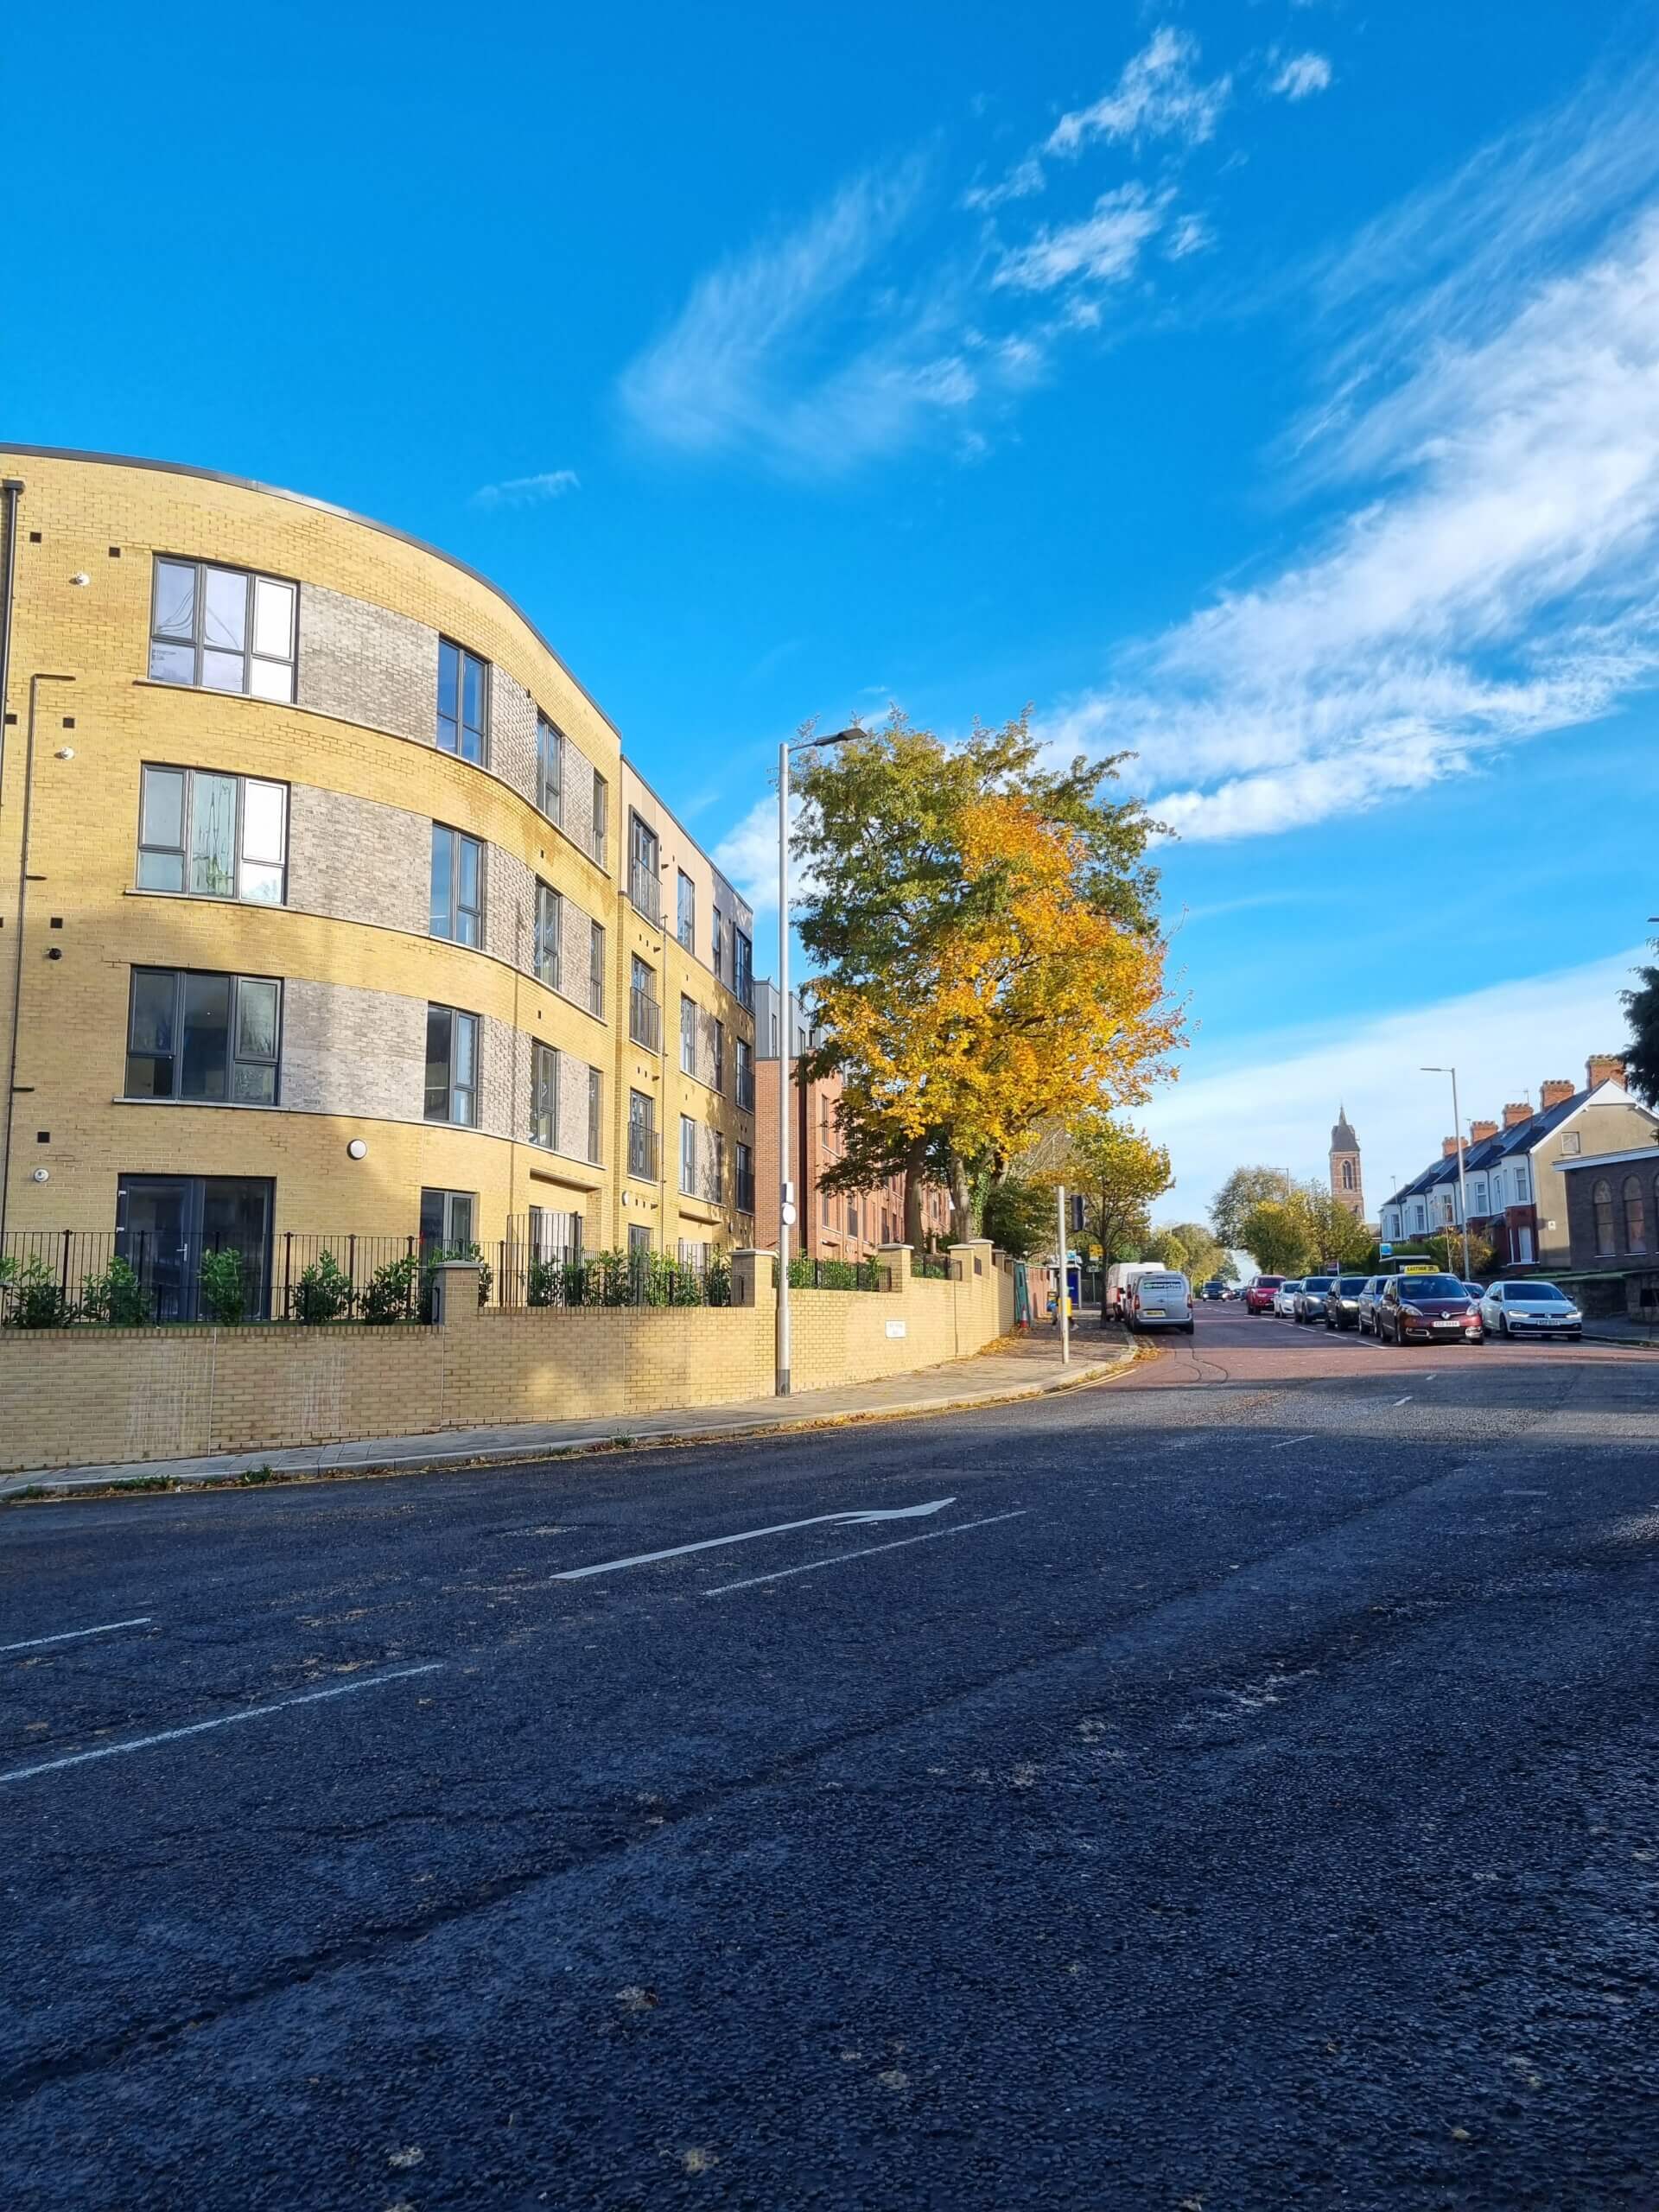 20231102 100603 scaled - Project Update: Park Avenue, Belfast